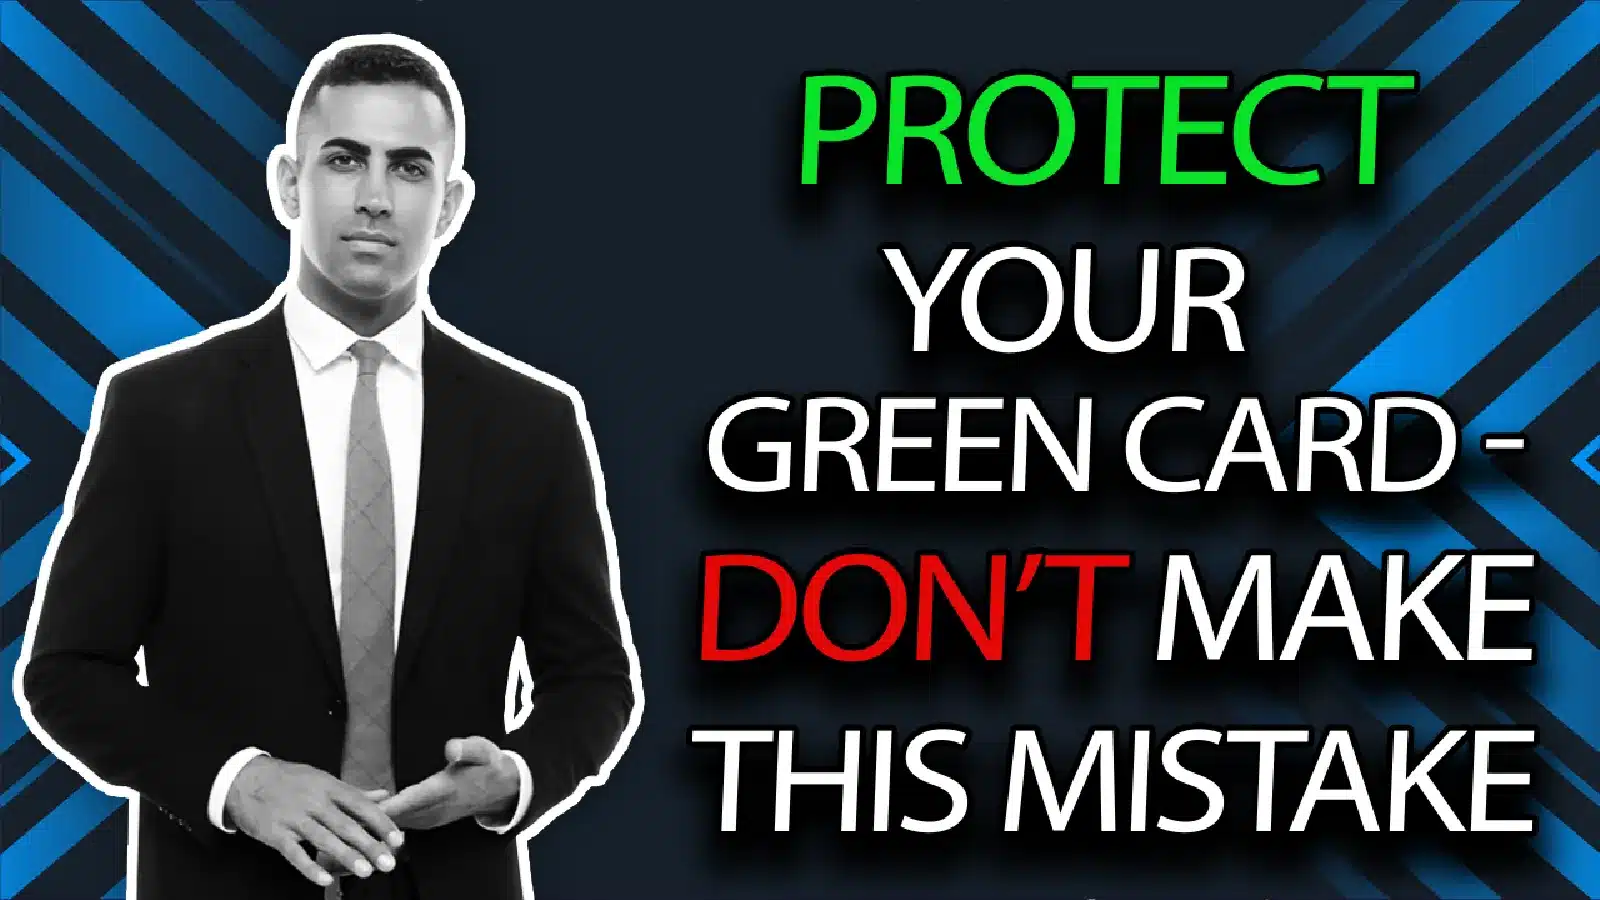 Protect Your Green Card - Don't Make This Mistake